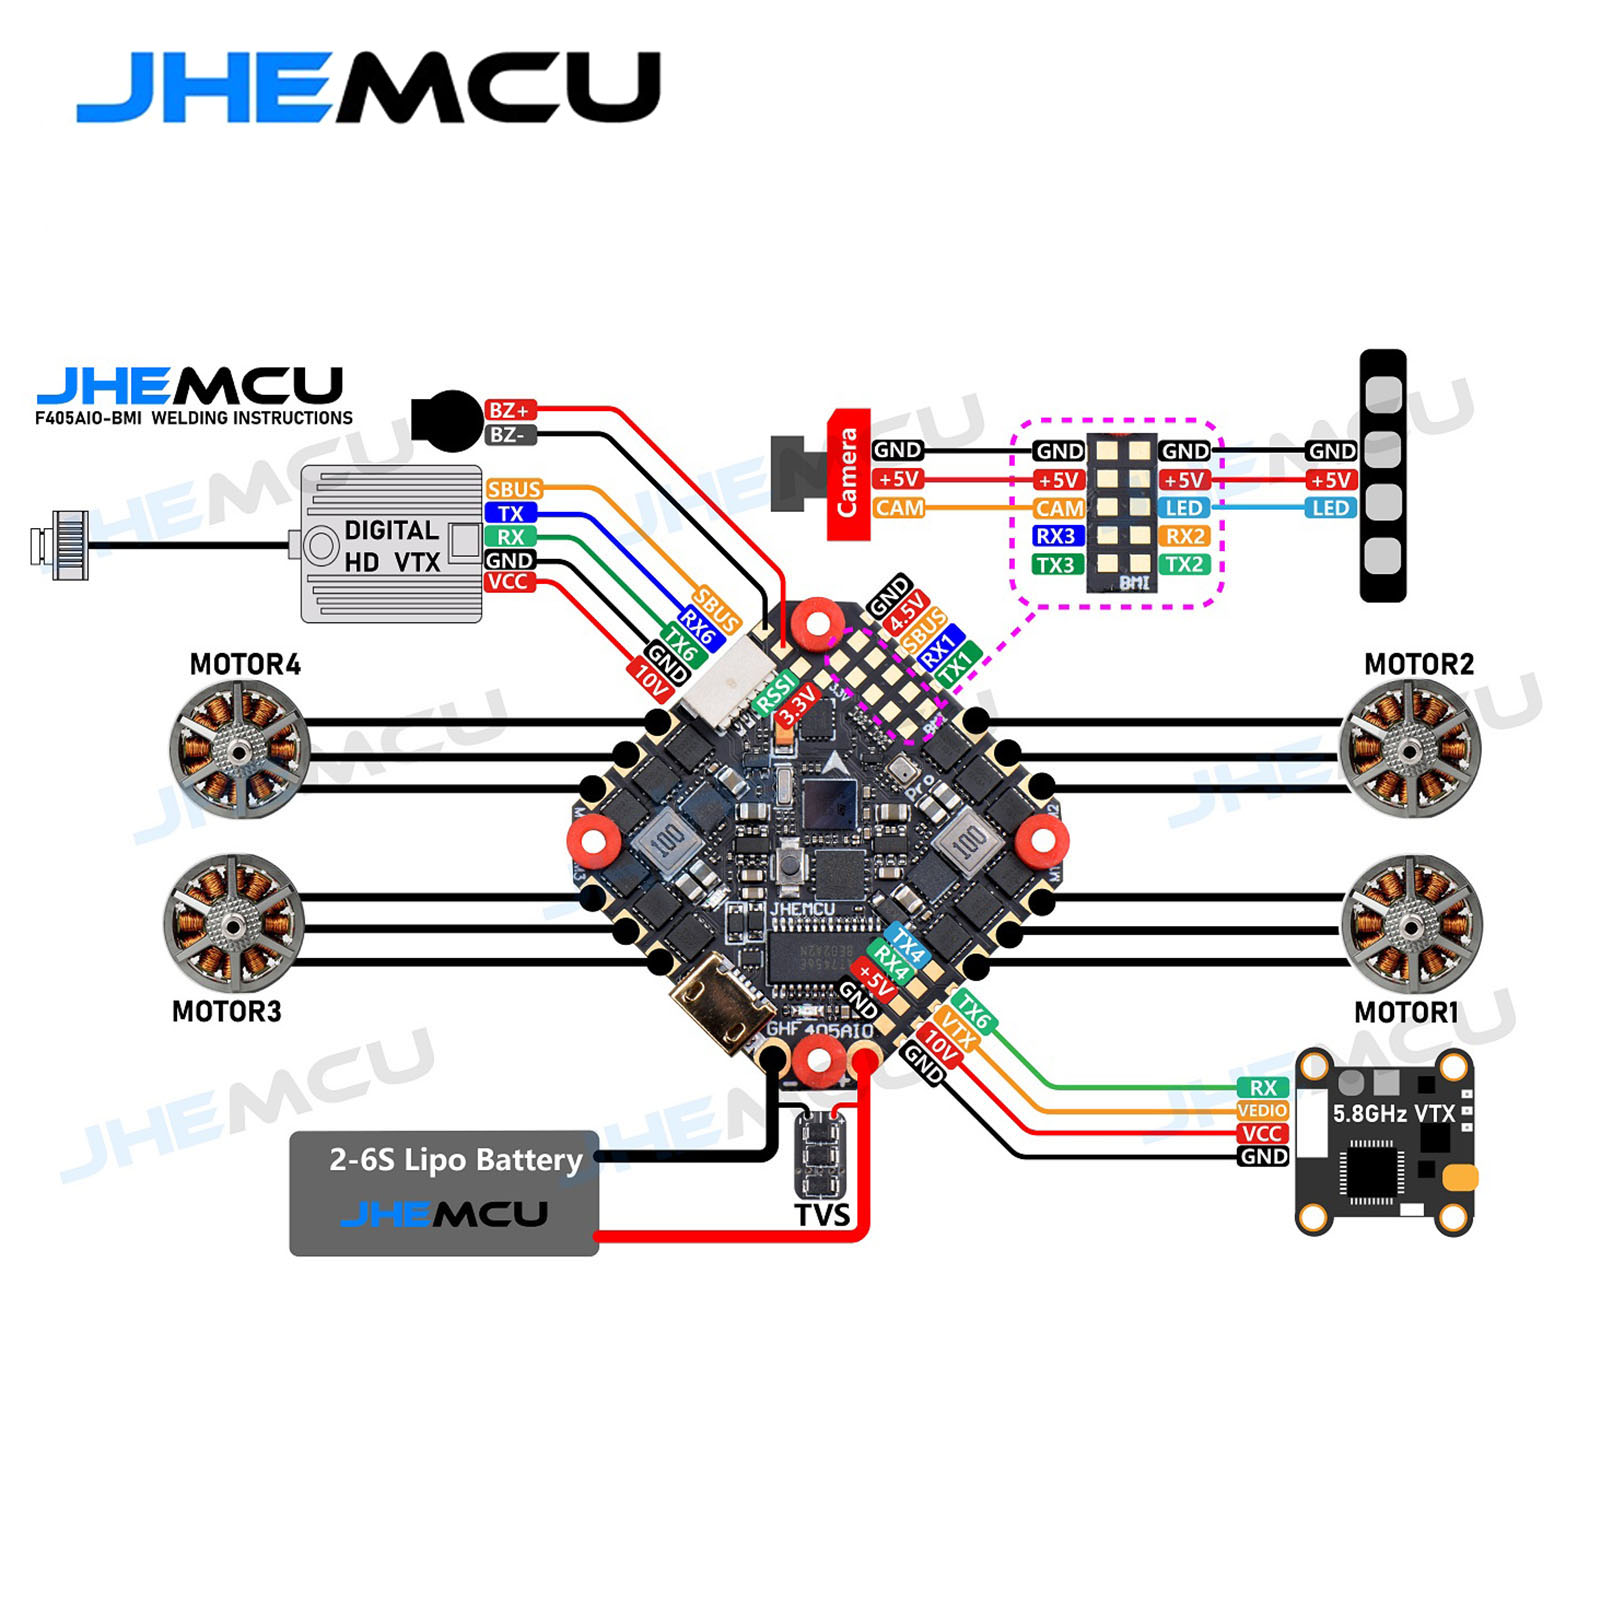 JHEMCU GHF405AIO-BMI F405 Flight Controller W5V 10V BEC Built-in 40A BLHELI_S 2-6S 4 in 1 ESC 25.5X25.5mm for - image 4 of 7